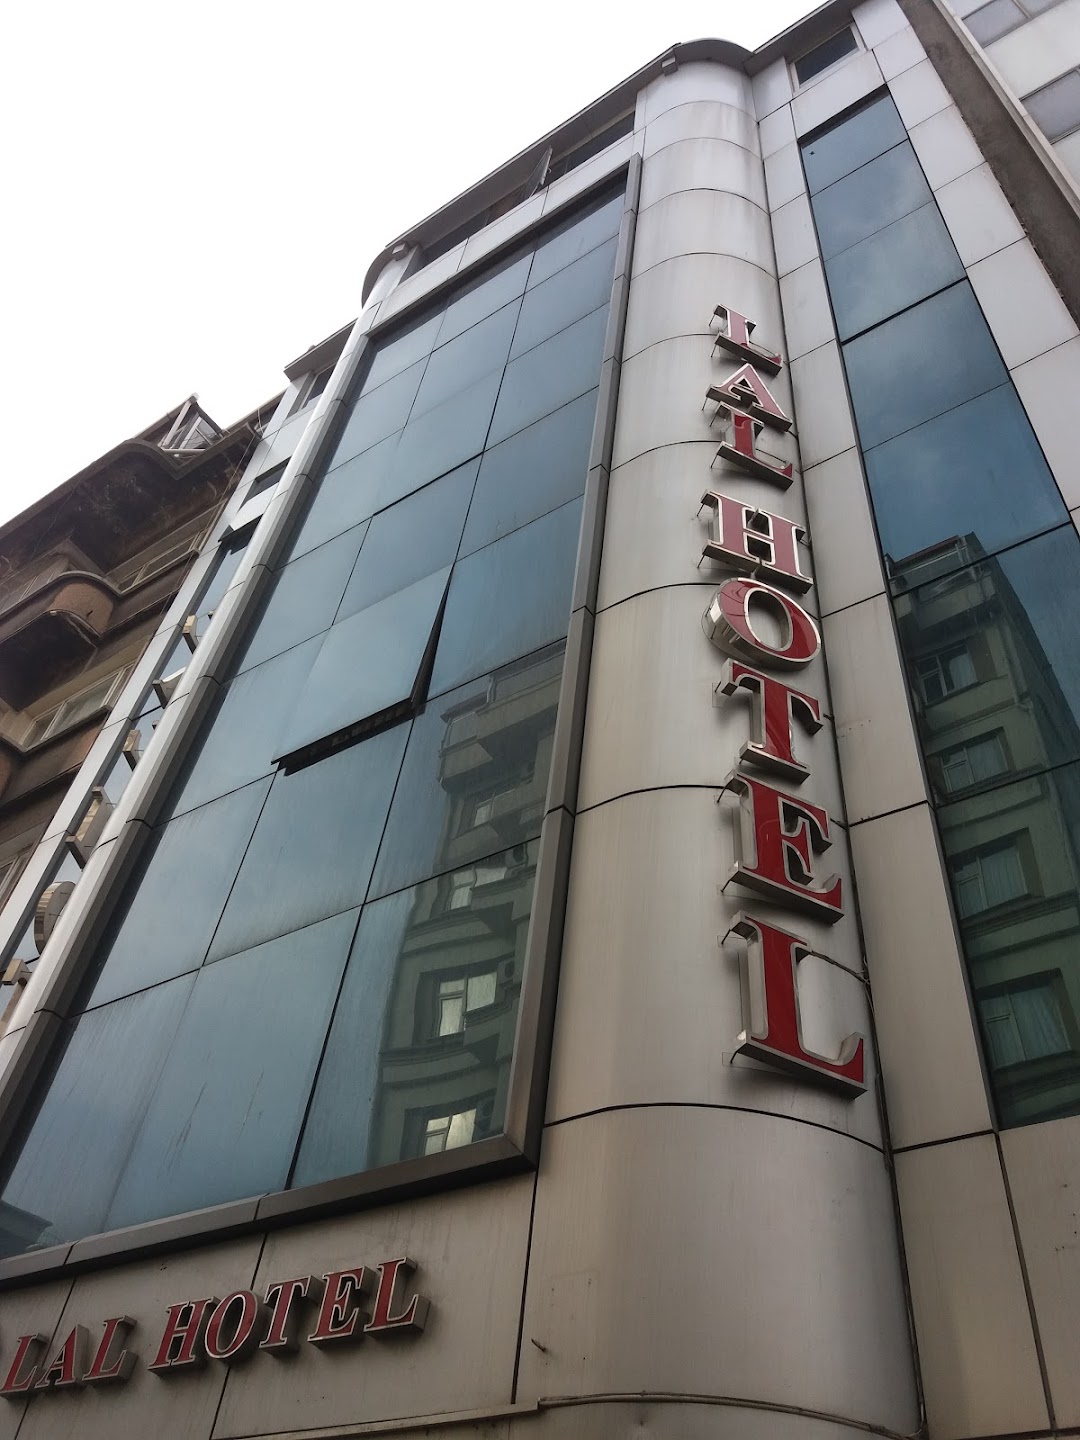 LAL HOTEL